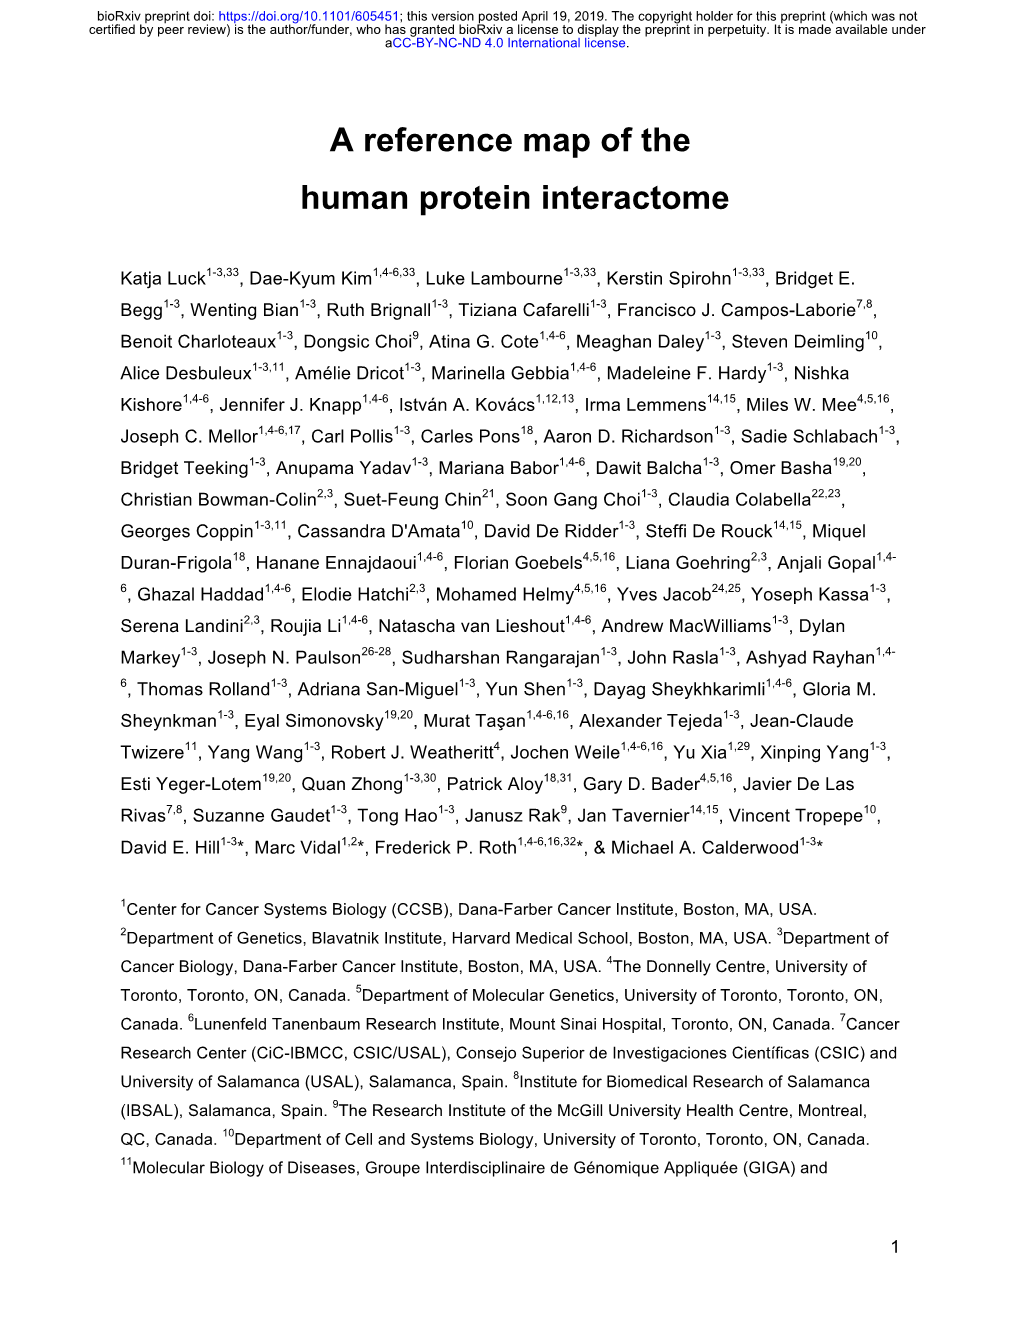 A Reference Map of the Human Protein Interactome